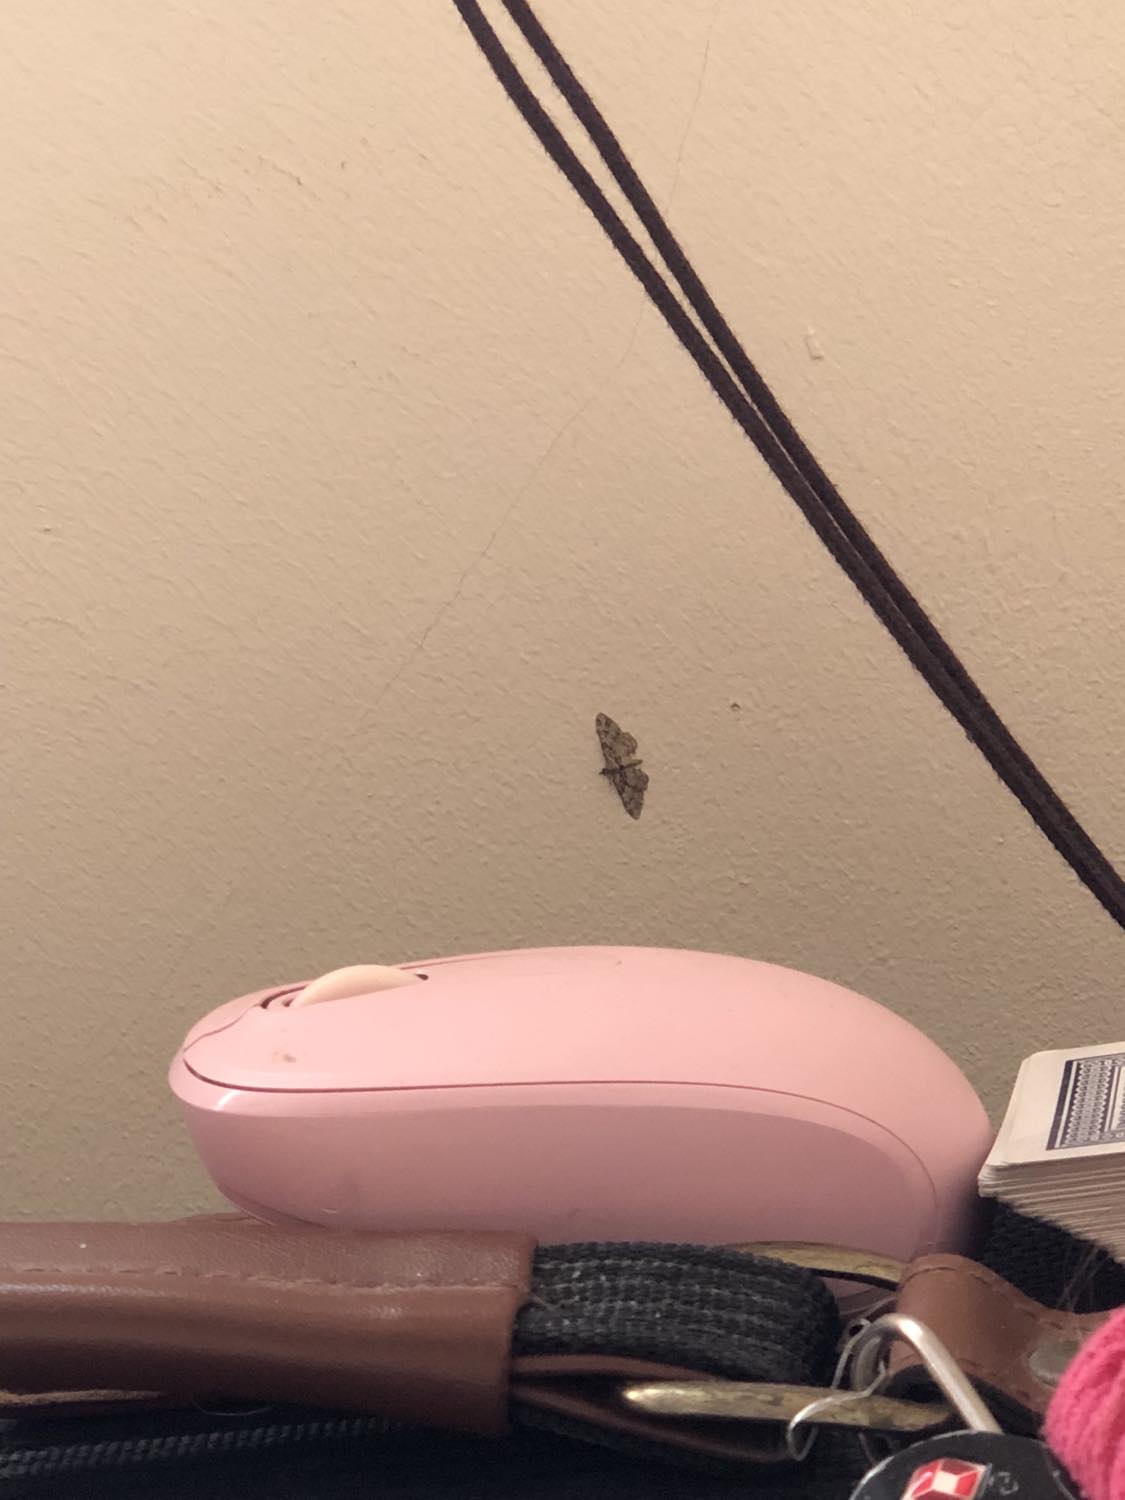 That one little moth that rested for the night directly in front of me, with my pink computer mouse visible beneath it, as well as a deck of cards, a harrow deck of many things lol, and the curtain string running diagonally across the wall above it.